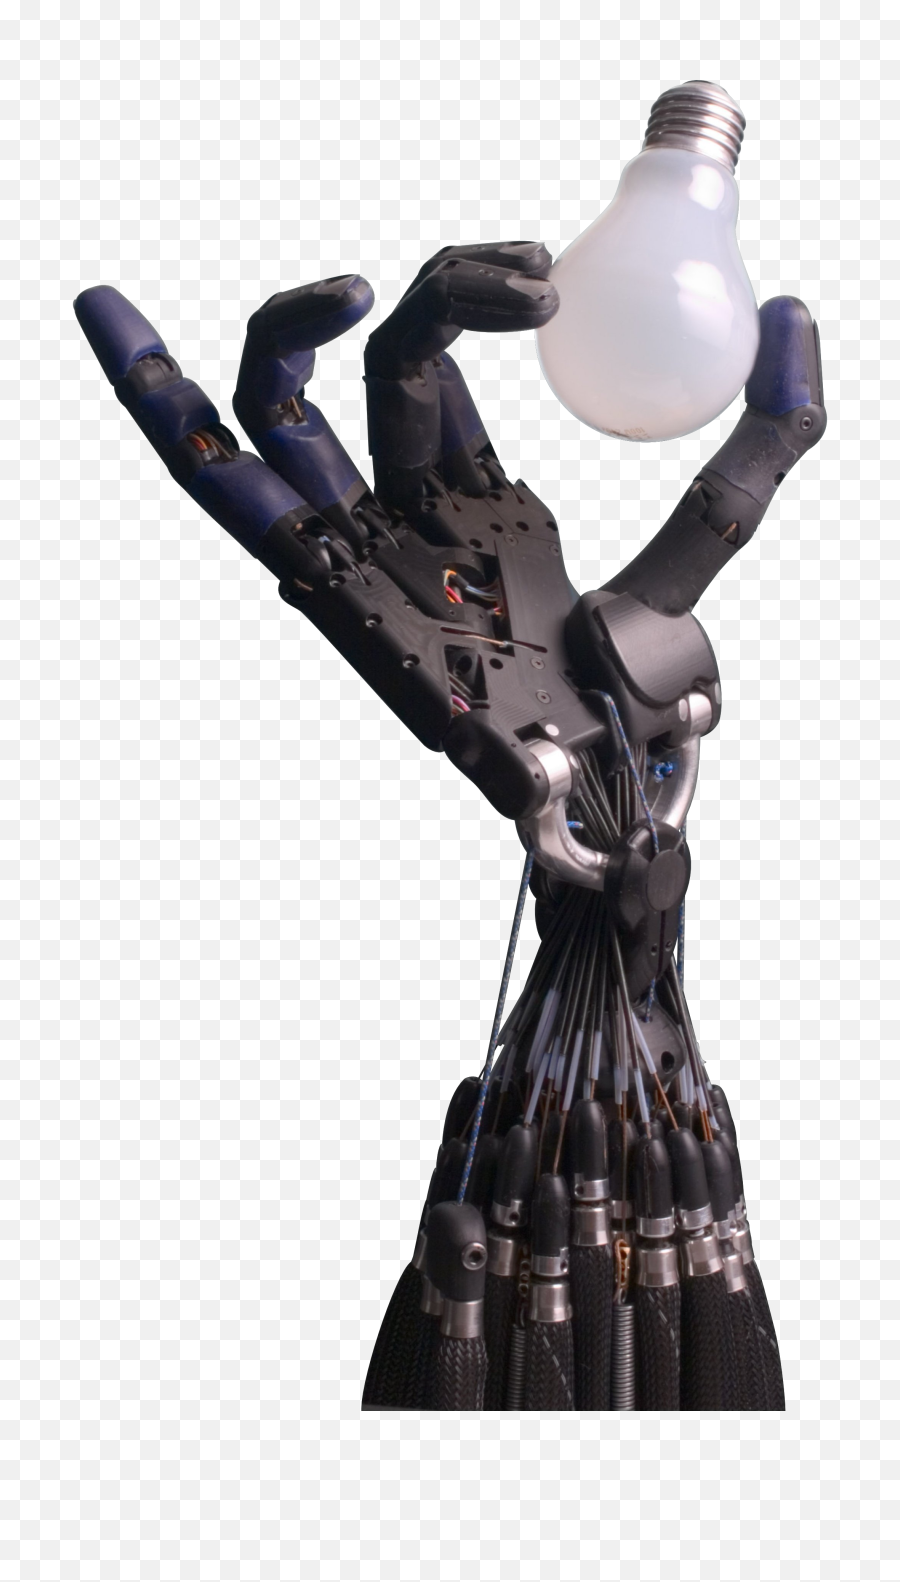 Fileshadow Hand Bulb Large Alphapng - Wikimedia Commons Robot End Effector Hand,Hand Holding Gun Transparent